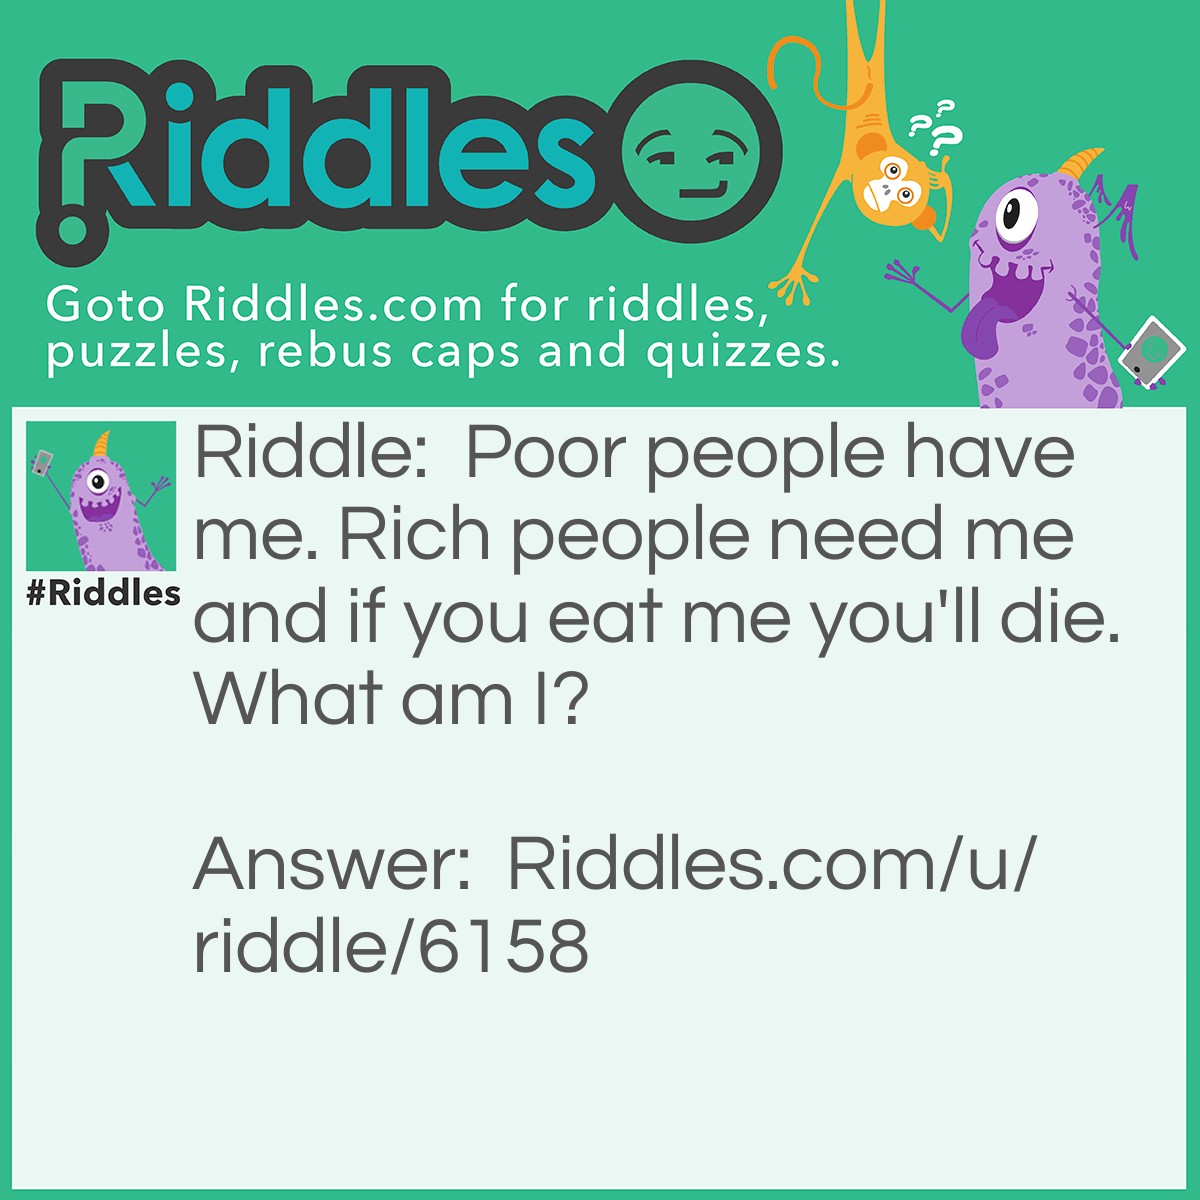 Riddle: Poor people have me. Rich people need me and if you eat me you'll die. What am I? Answer: pPor people have (nothing) rich people need (nothing) if you eat (nothing) you'll die The Awnser is (Nothing).